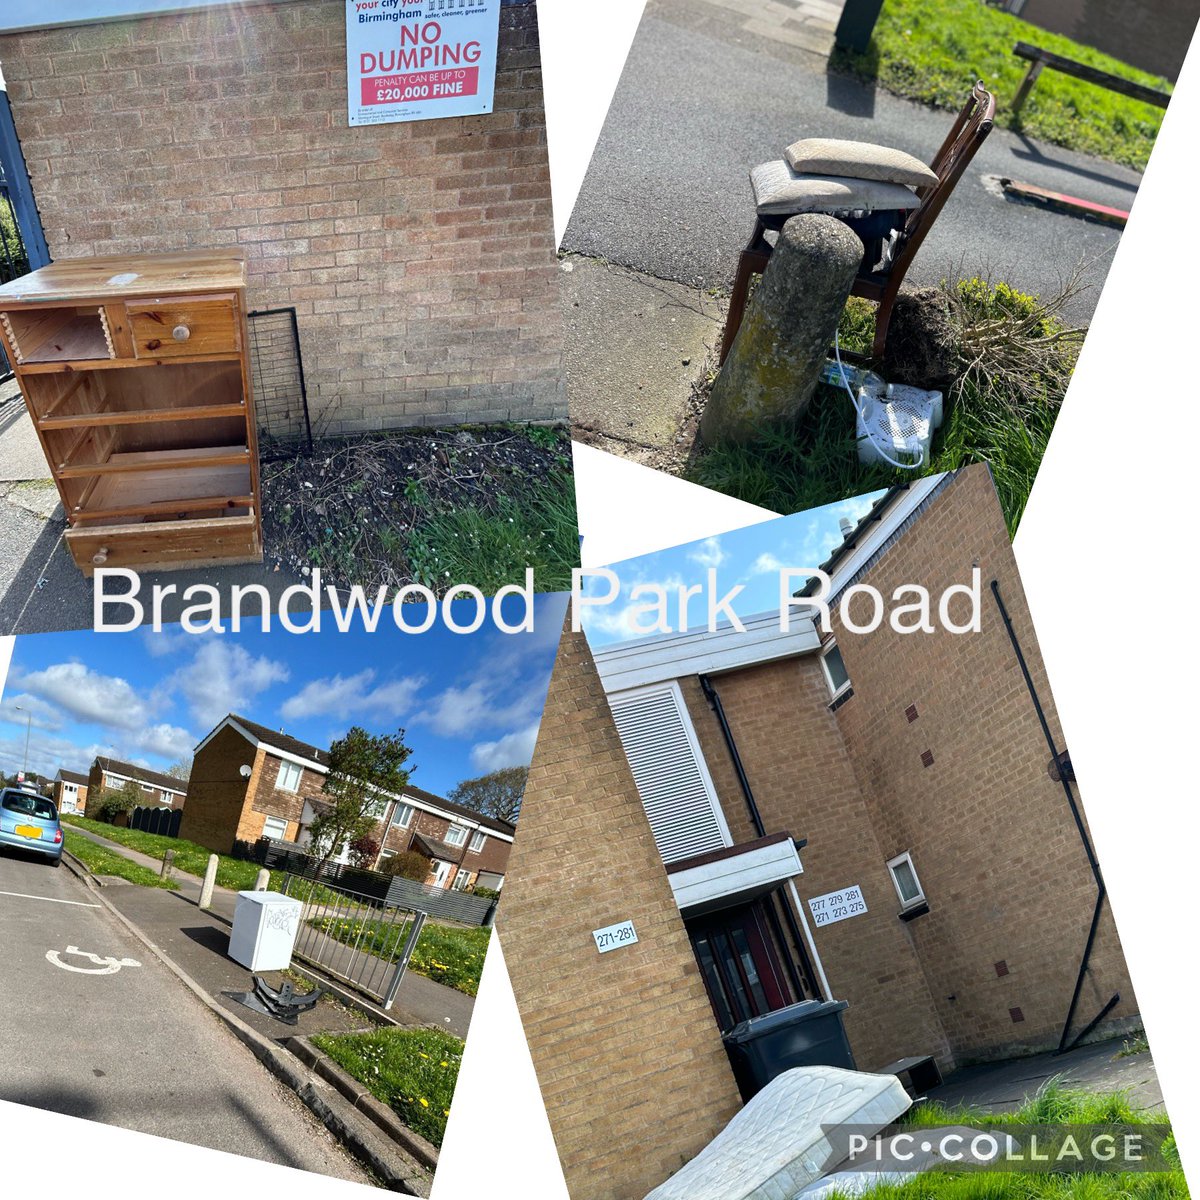 Just HAD to do it for me!
It has been so disheartening seeing the rubbish up Allenscroft & Brandwood Park Rd!
…. So… a solo mile, and 7 lots of flytipping reported and 4 bags full of litter! Soooo cathartic!